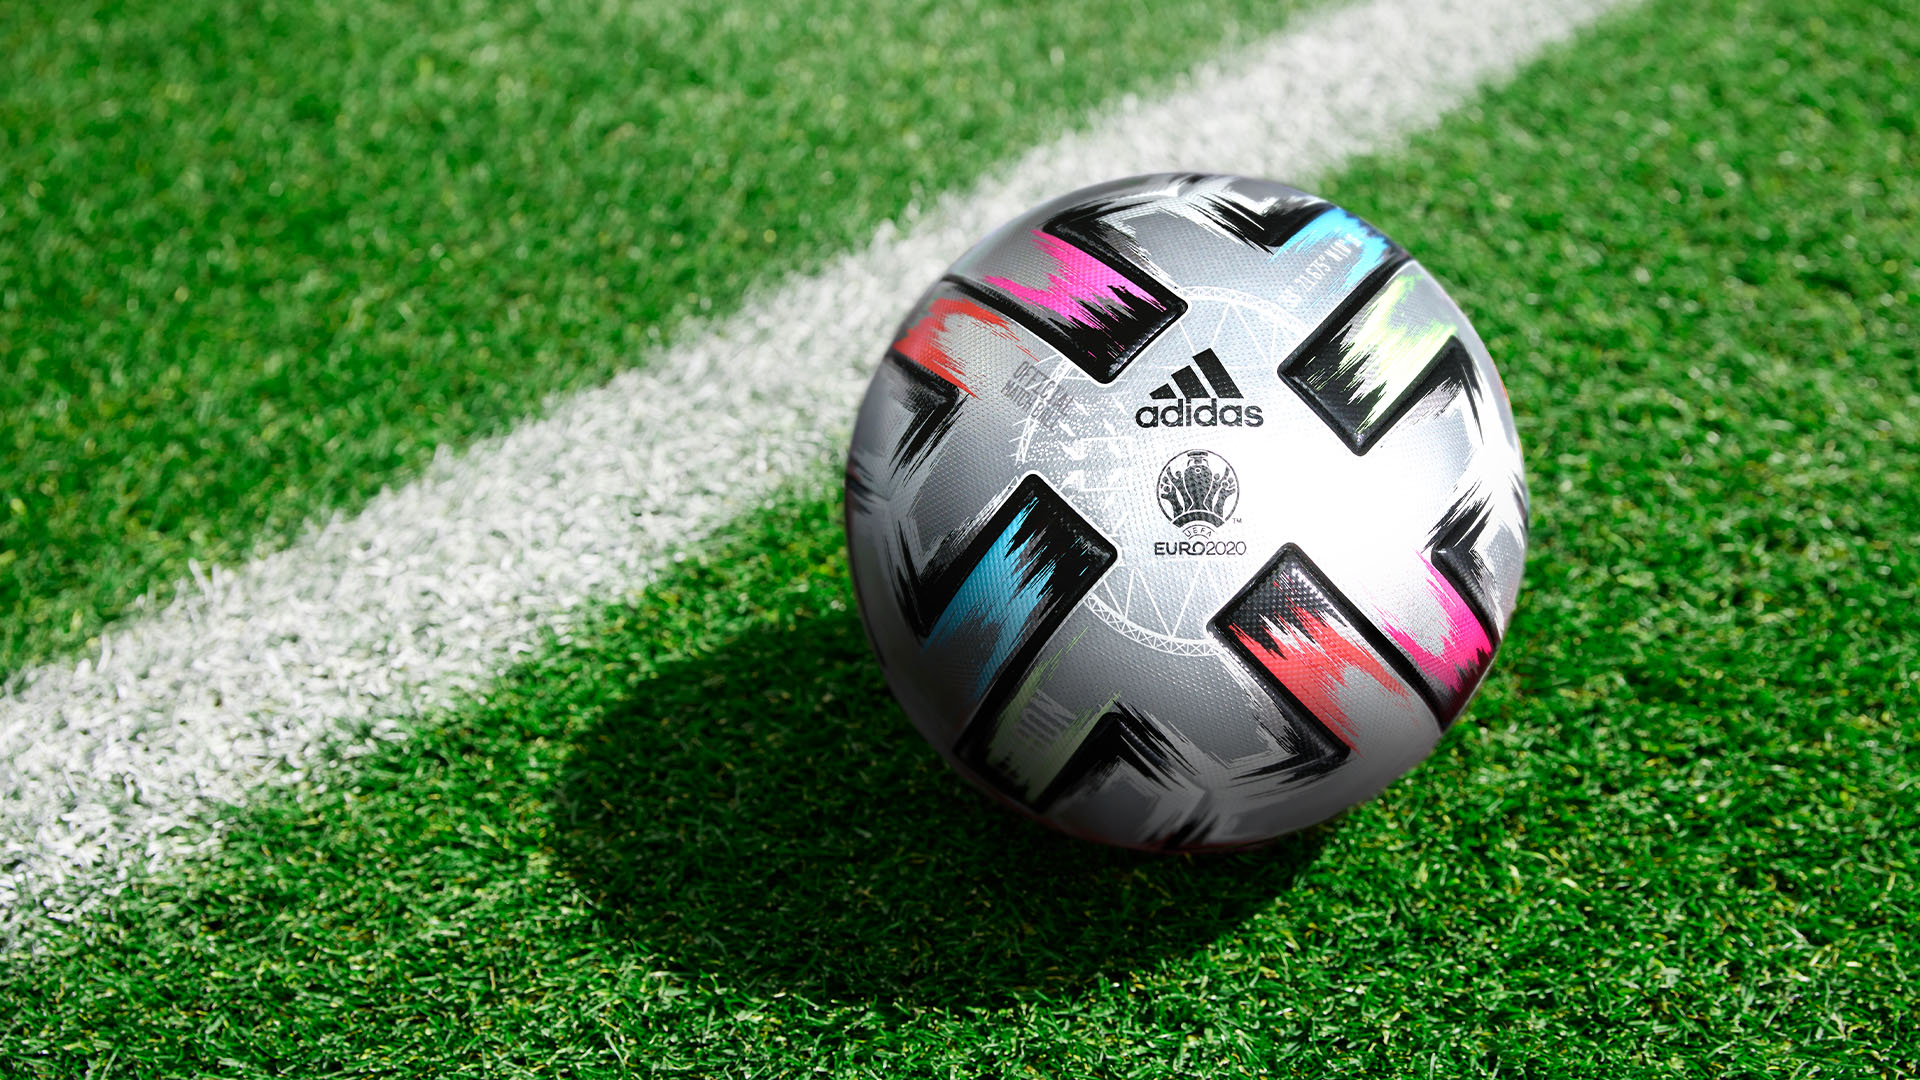 adidas Unveil the UNIFORIA FINALE, The Match Ball for the Final Stages of Euro 2020